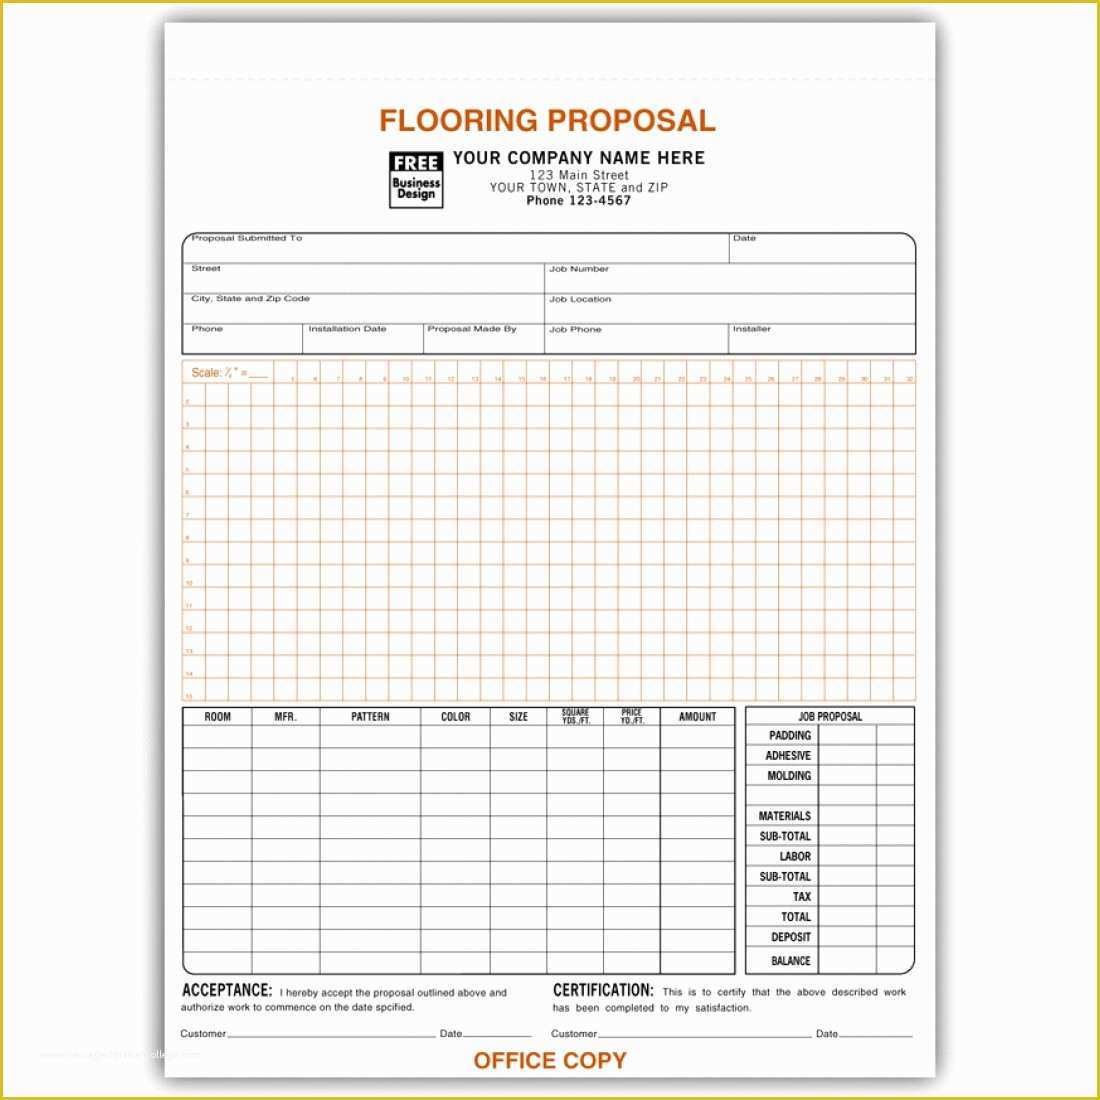 Free Flooring Estimate Template Of Flooring Proposal forms with Signature